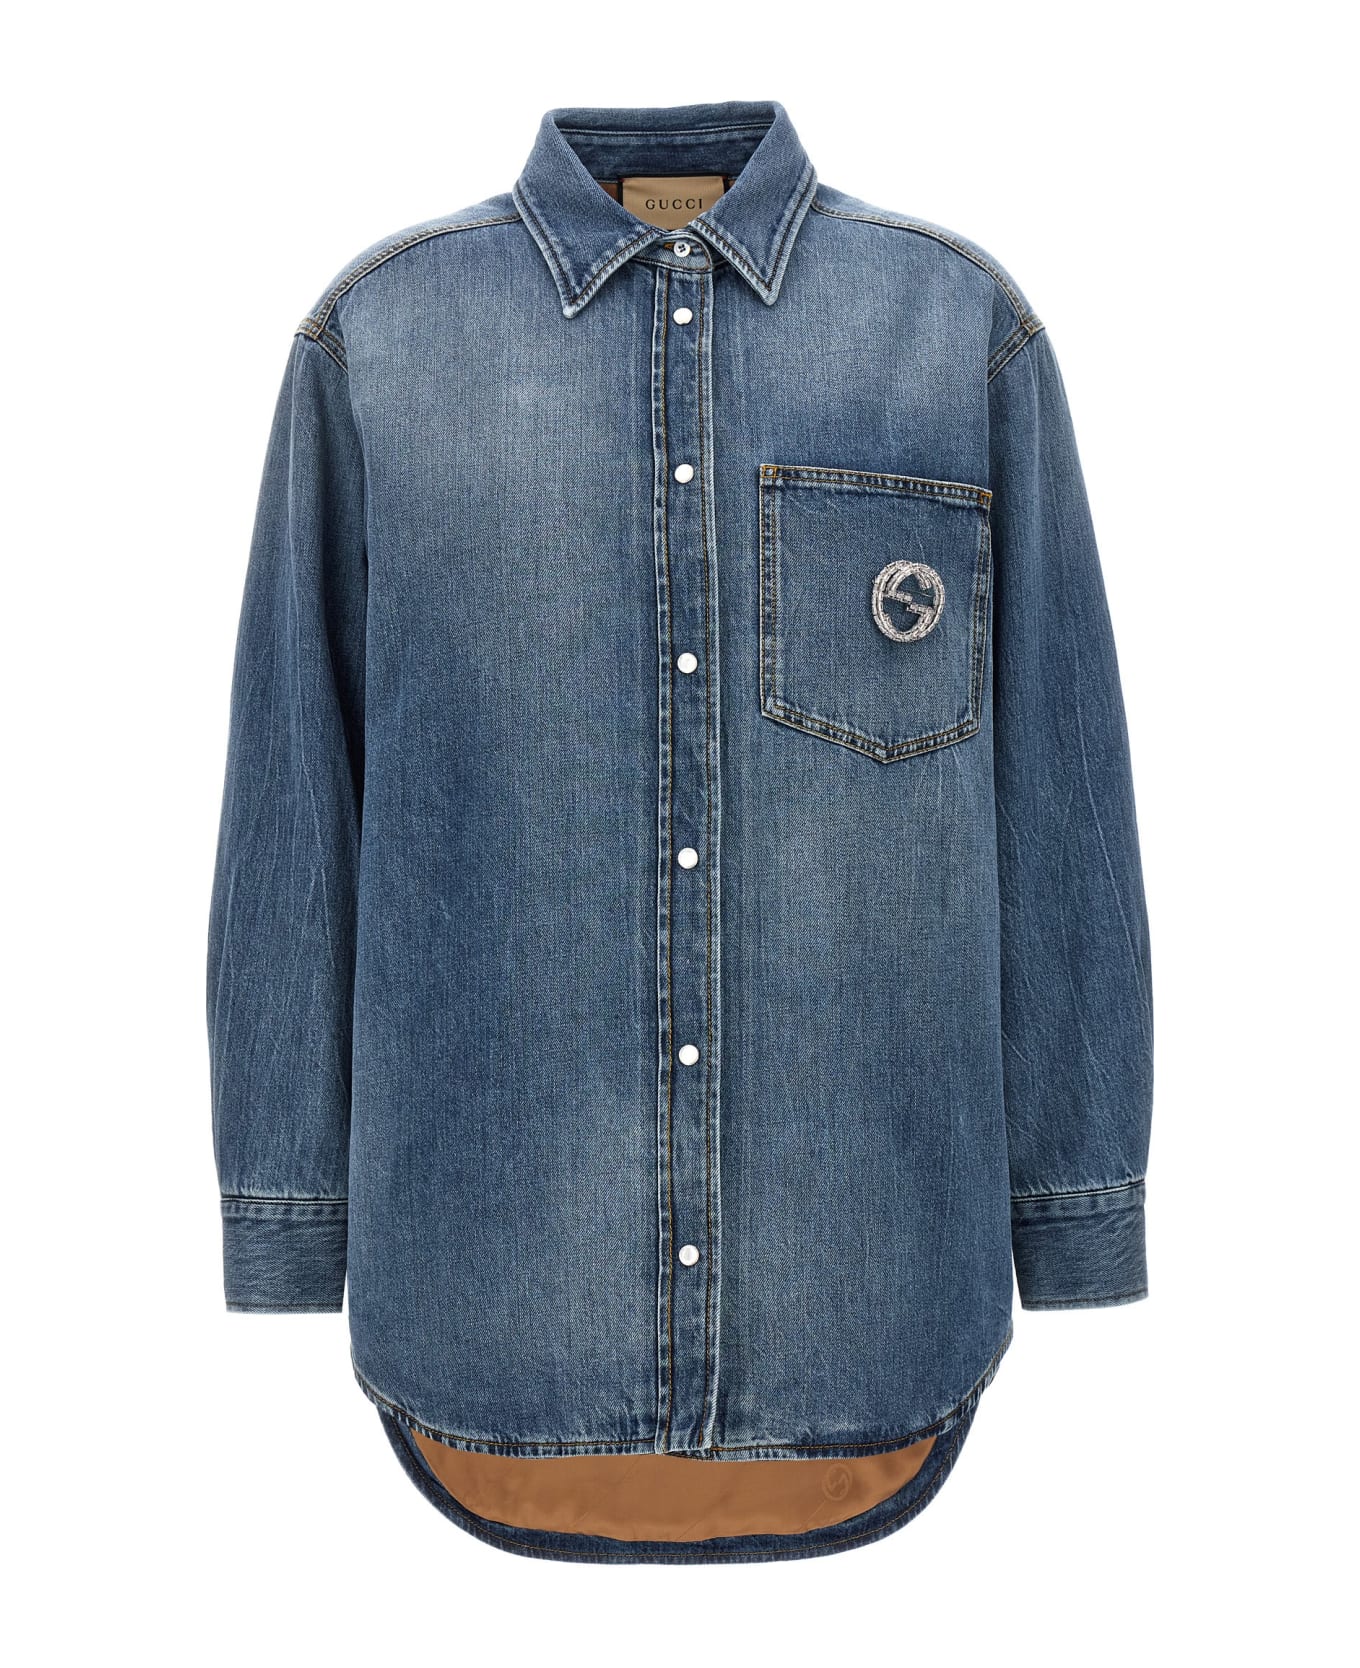 Gucci Quilted Inner Denim Shirt - Blue